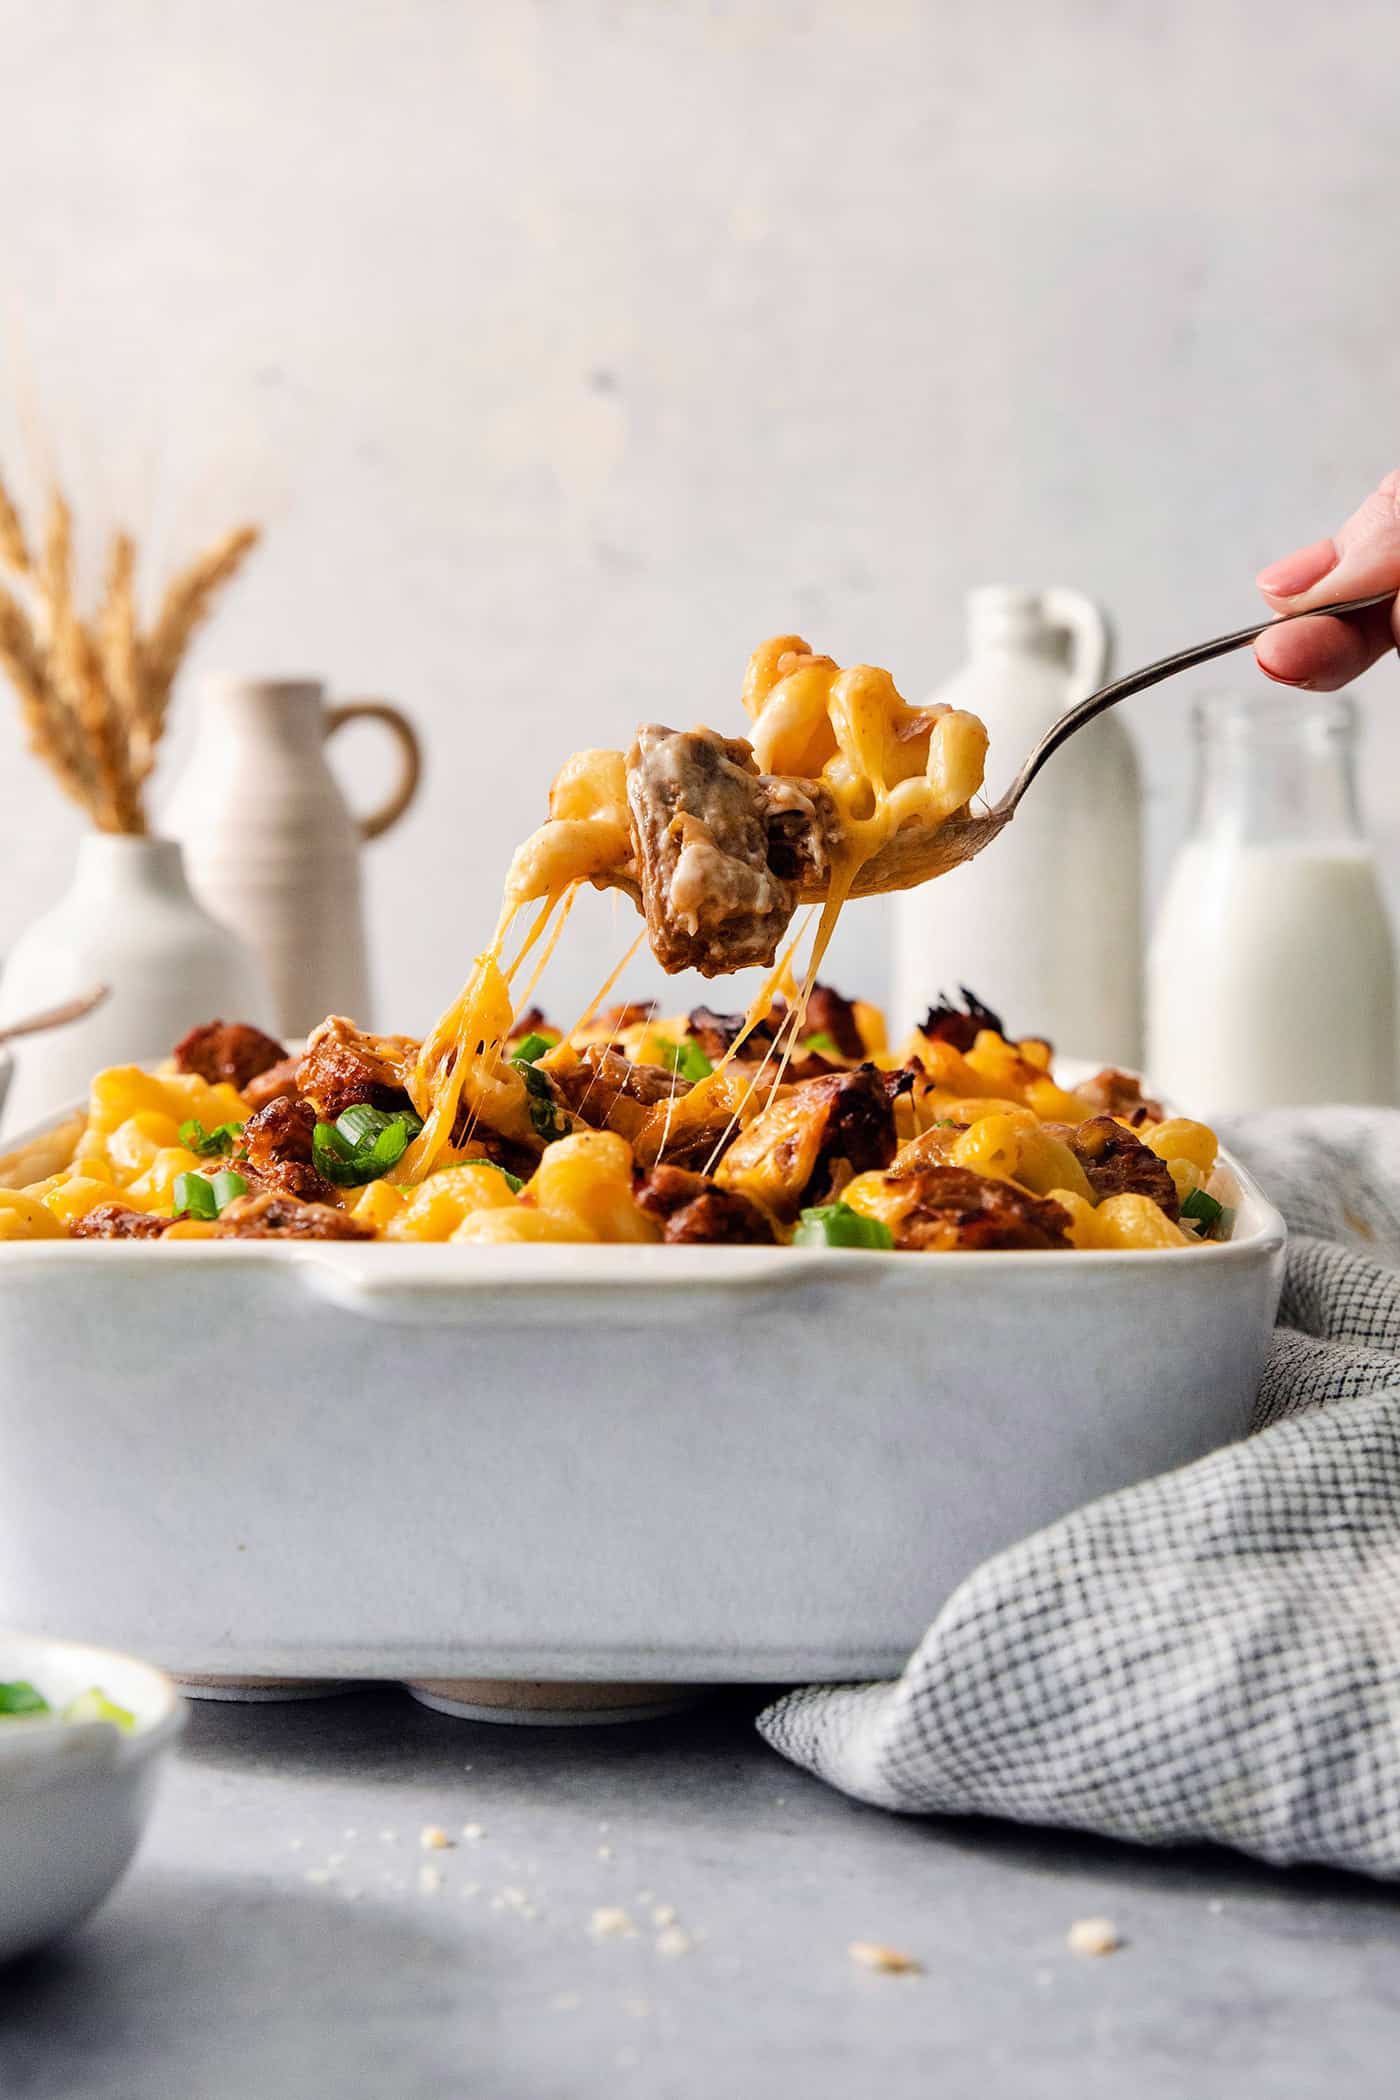 A hand lifts a serving spoon of pulled pork mac and cheese from a casserole dish.